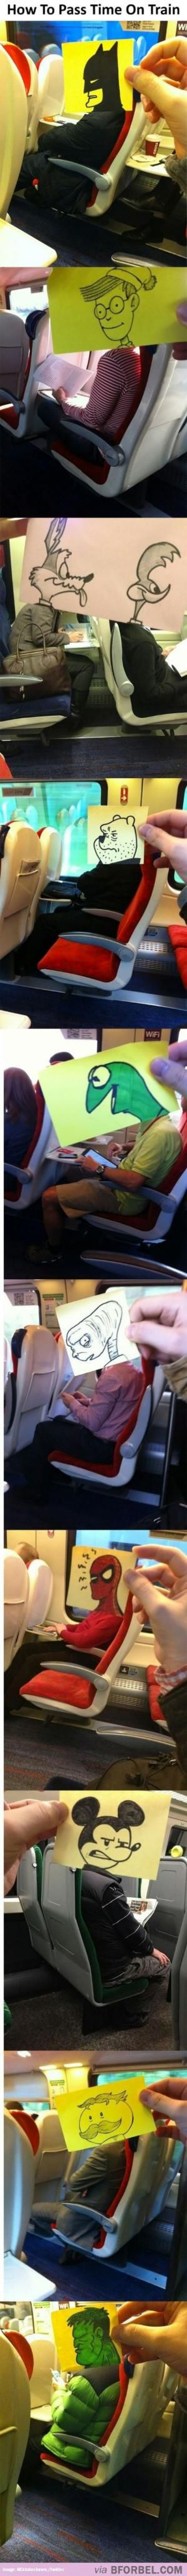 How To Pass Time On A Train